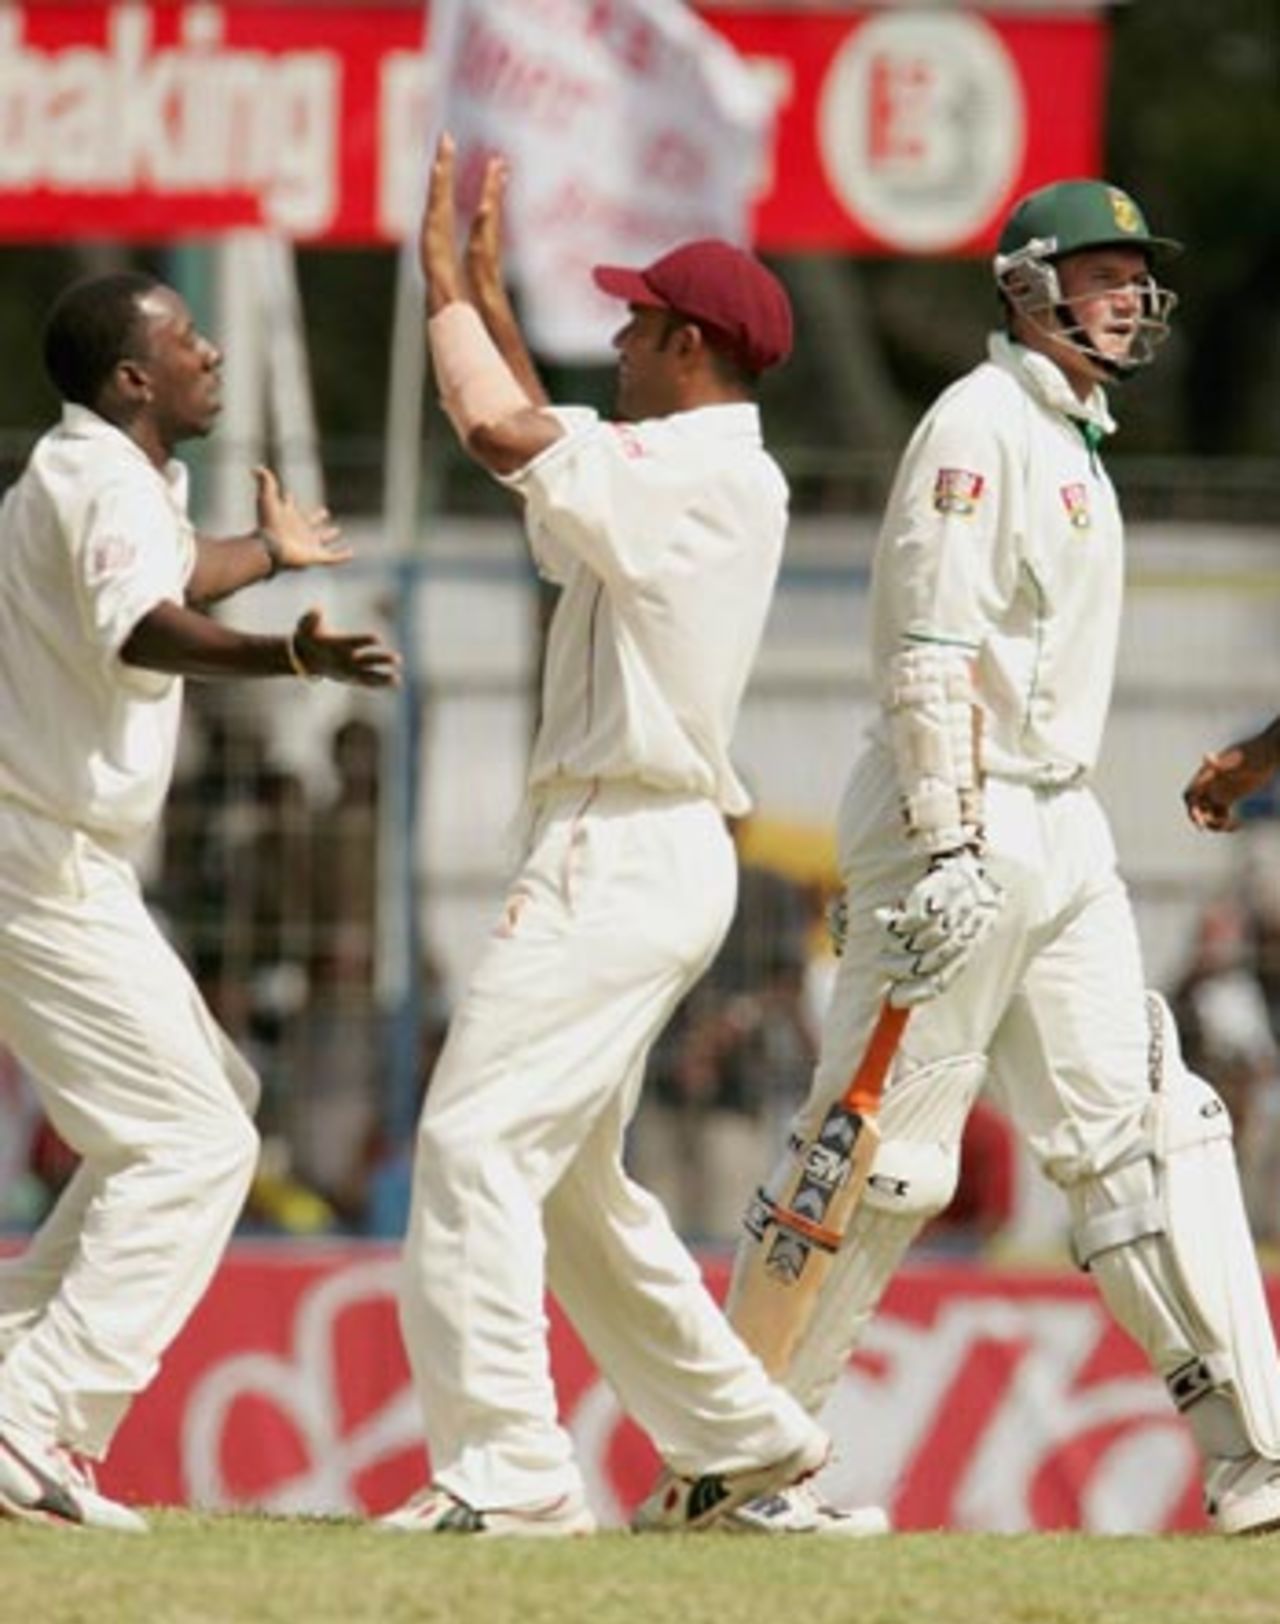 Pedro Collins strikes, as Graeme Smith is dismissed early, West Indies v South Africa, 1st Test, Guyana, April 2, 2005